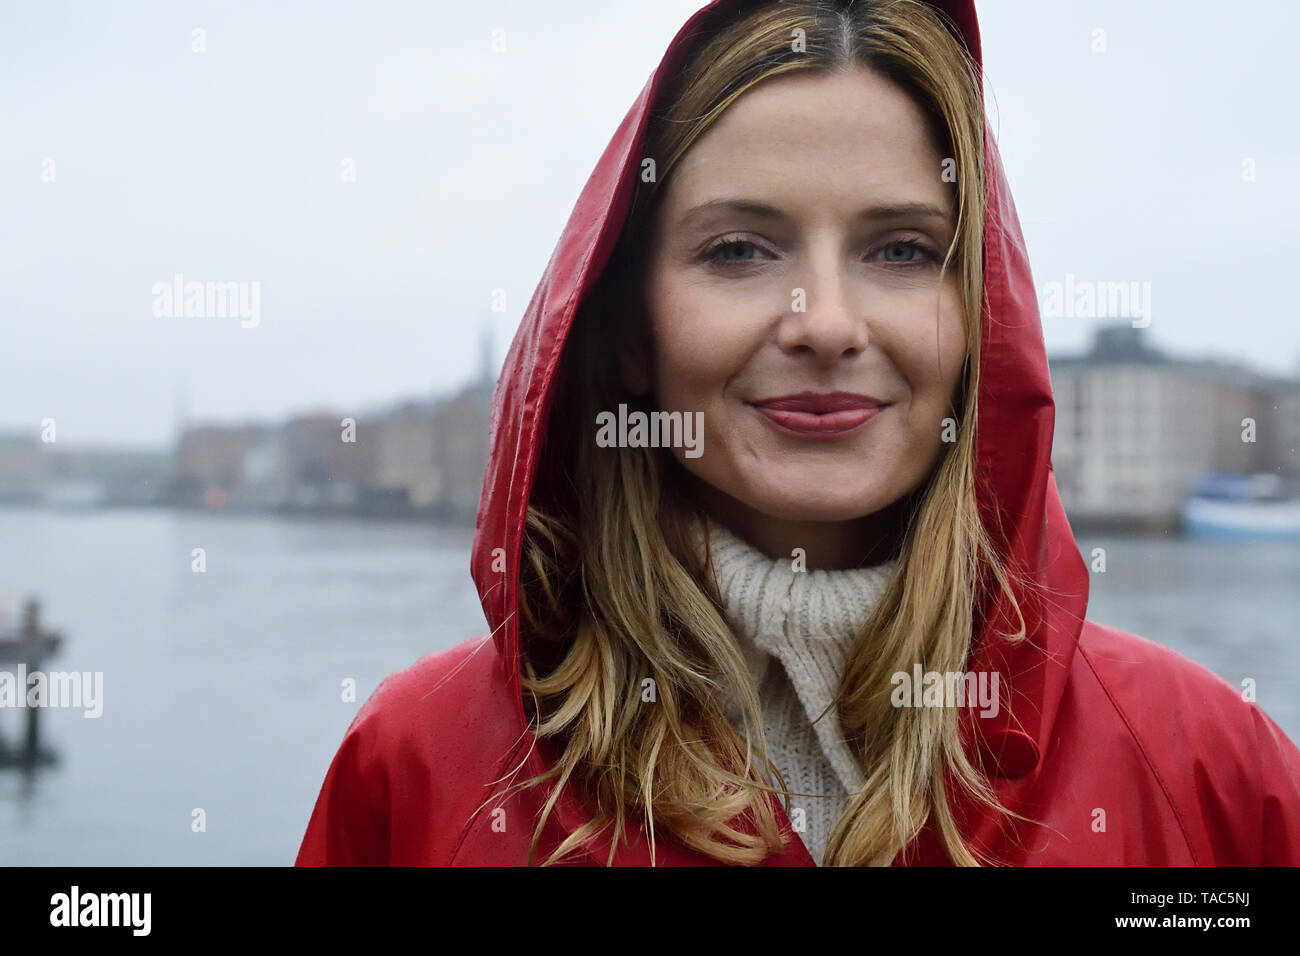 Denmark, Copenhagen, portrait of smiling woman at the waterfront in rainy weather Stock Photo